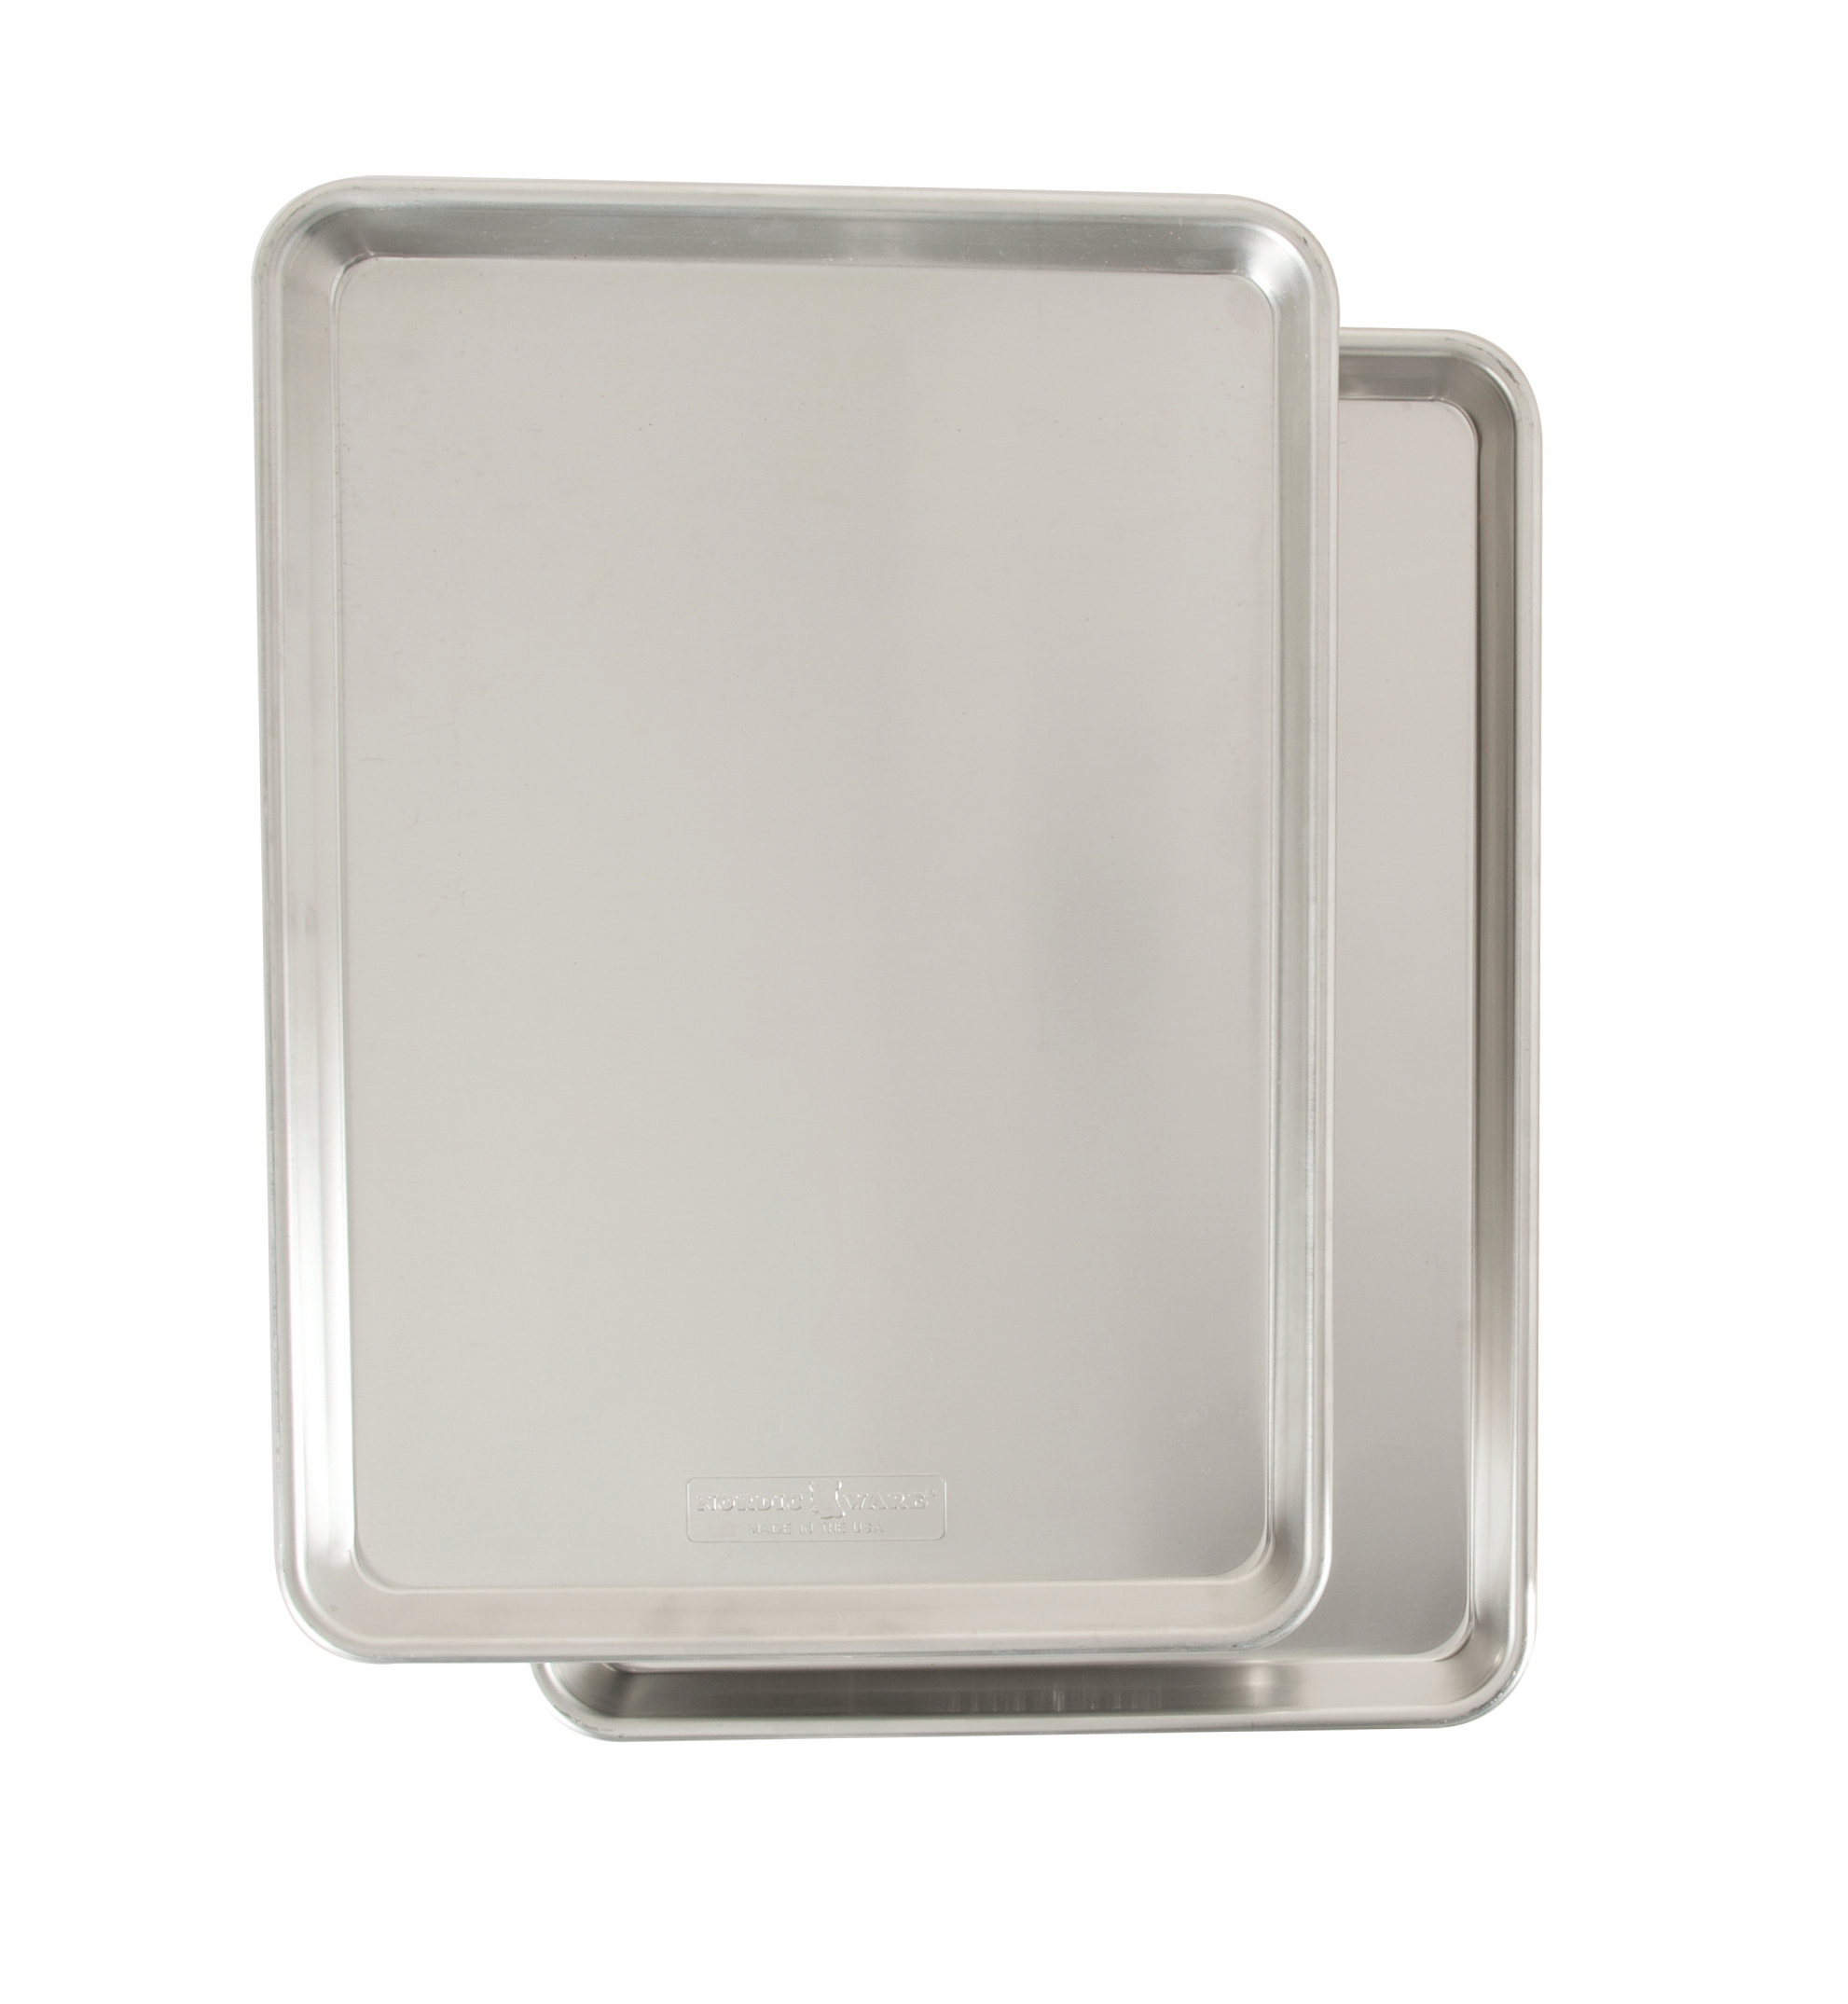 Nordic Ware Half Sheet Cover, 13 by 18 Inch, Clear